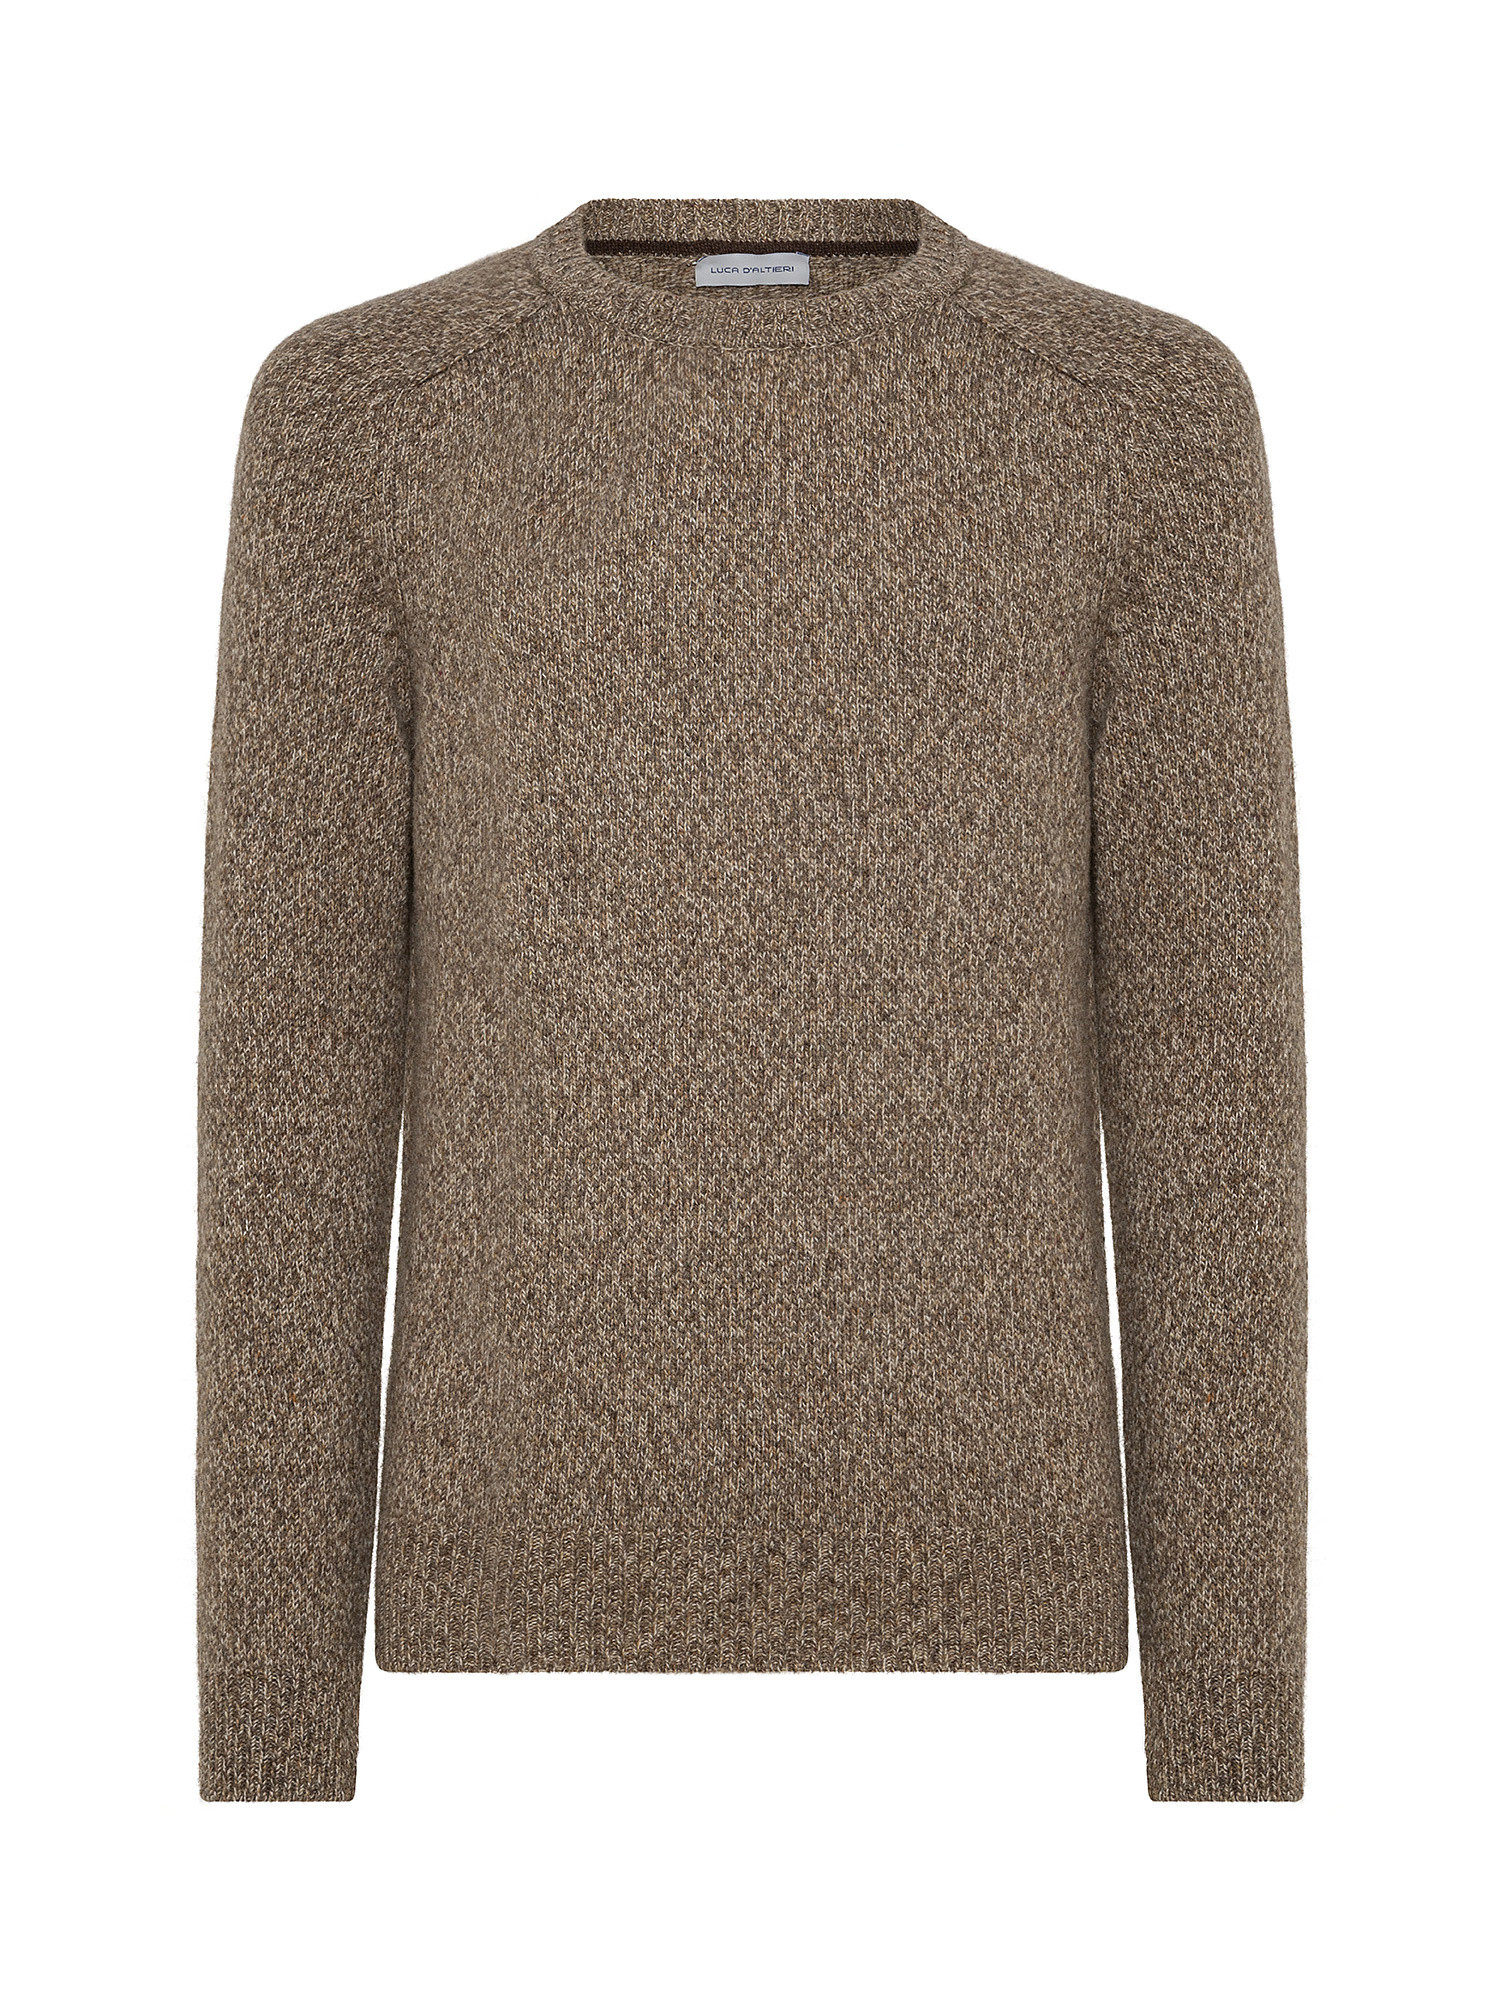 Pullover girocollo Mouline, Beige, large image number 0